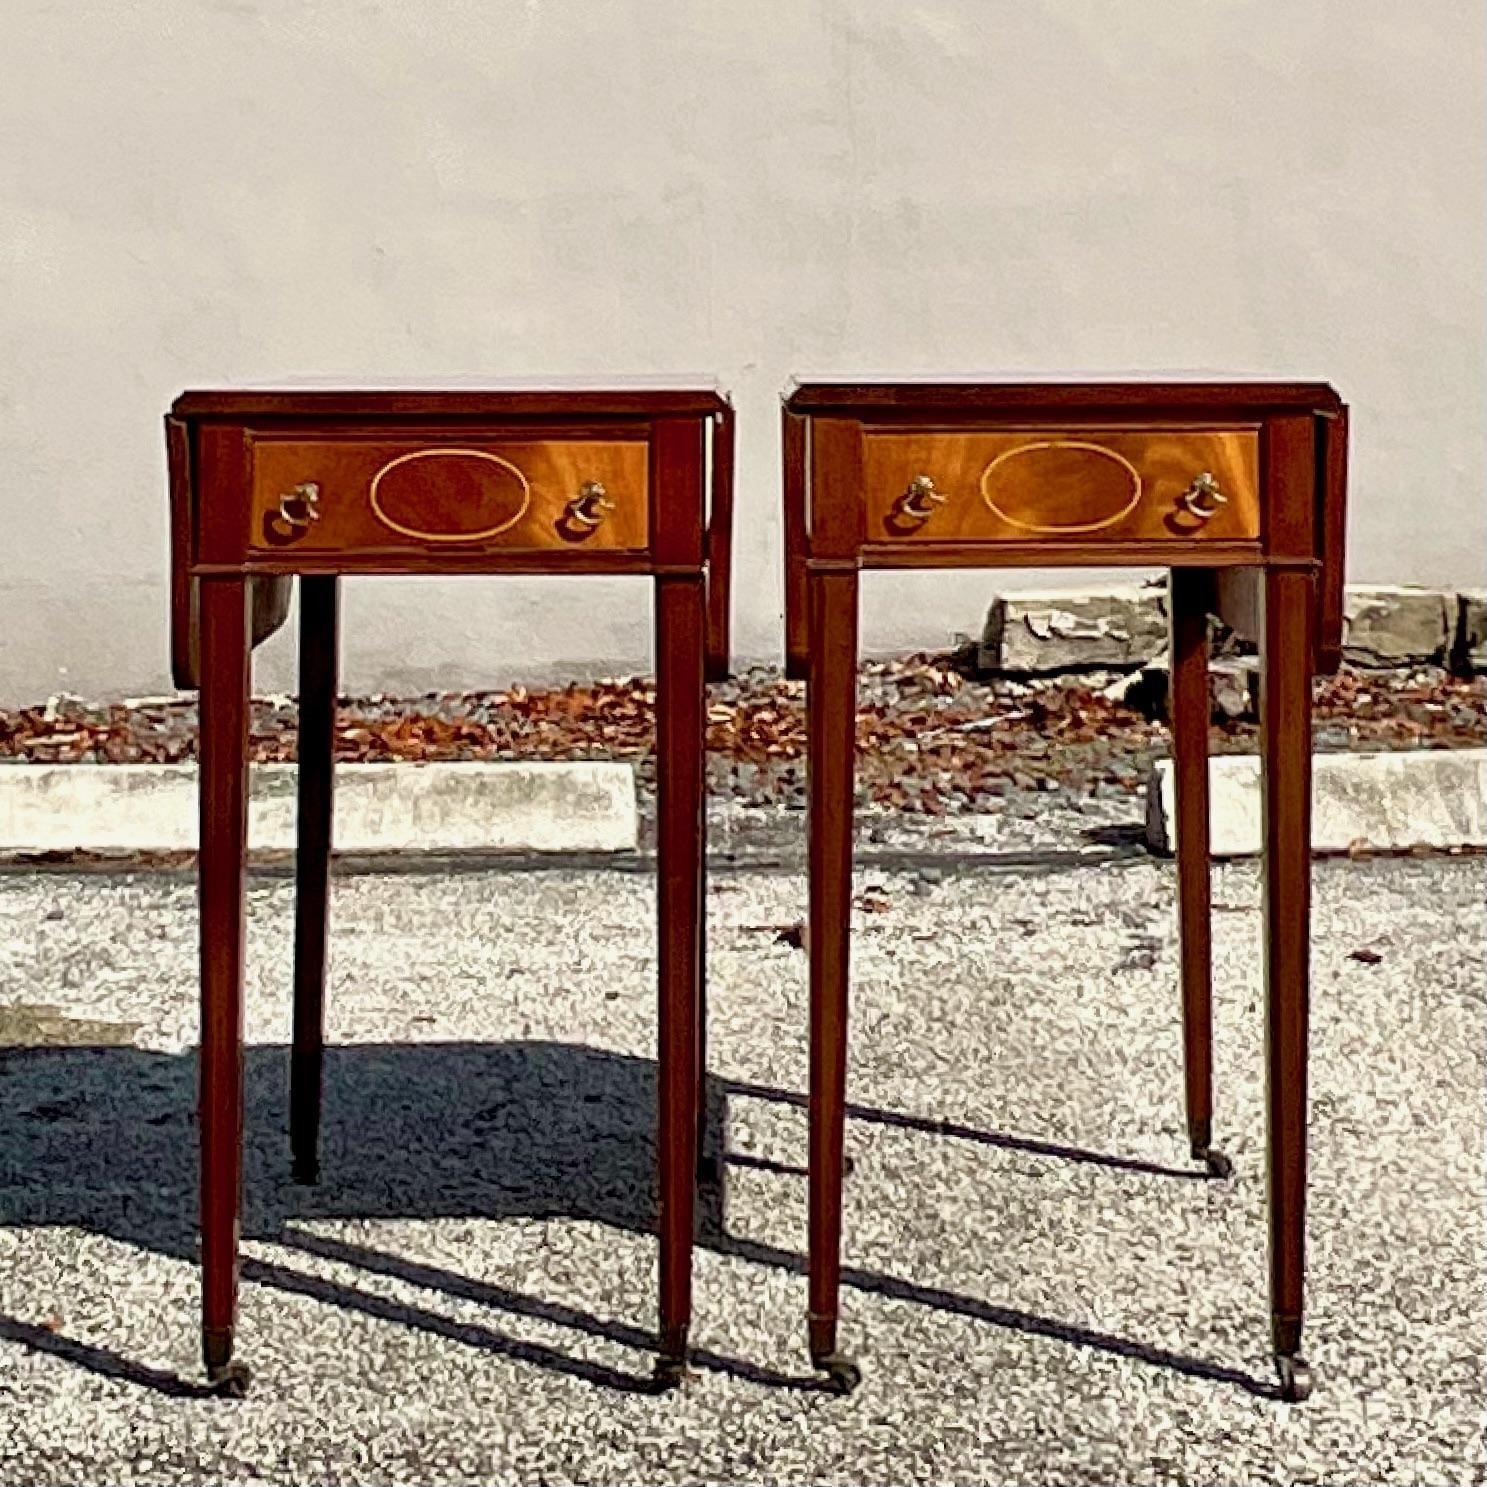 Exquisite pair of inlay mahogany pembroke tables featuring squared tapered legs on casters. This pair of pembroke tables will immediately elevate any space with a level of sophistication unmatched by many. The beauty is matched with functionality